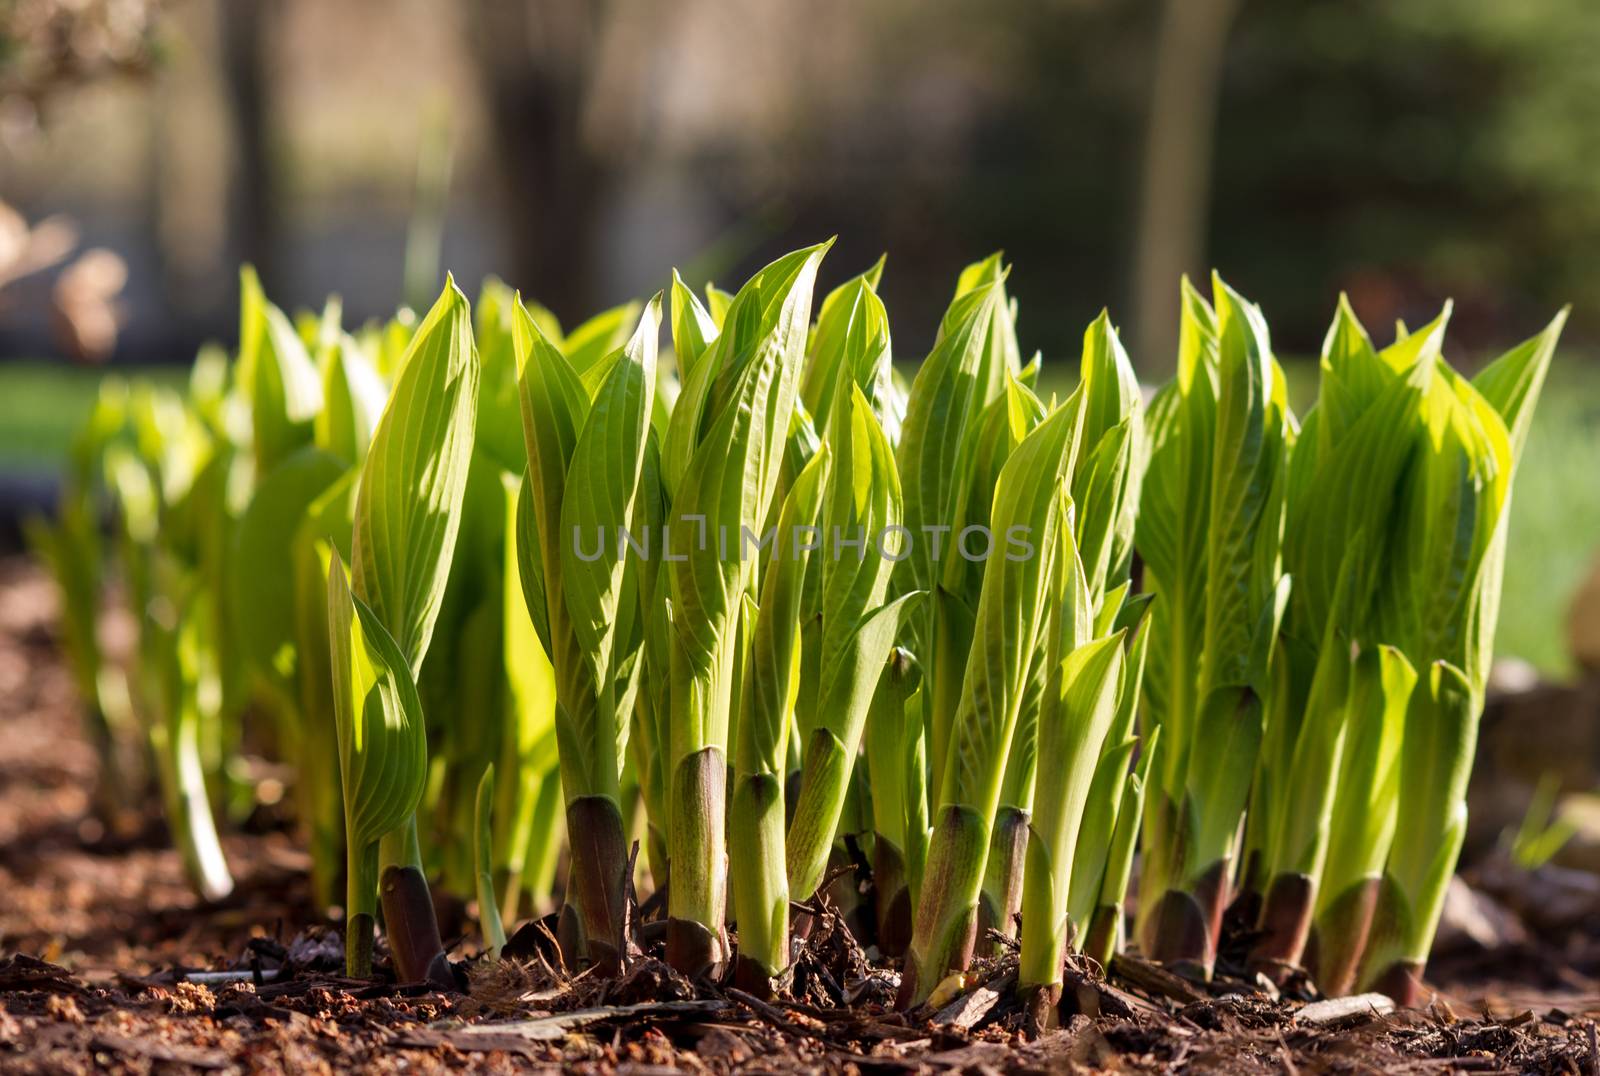 Hosta plants emerging in early Spring